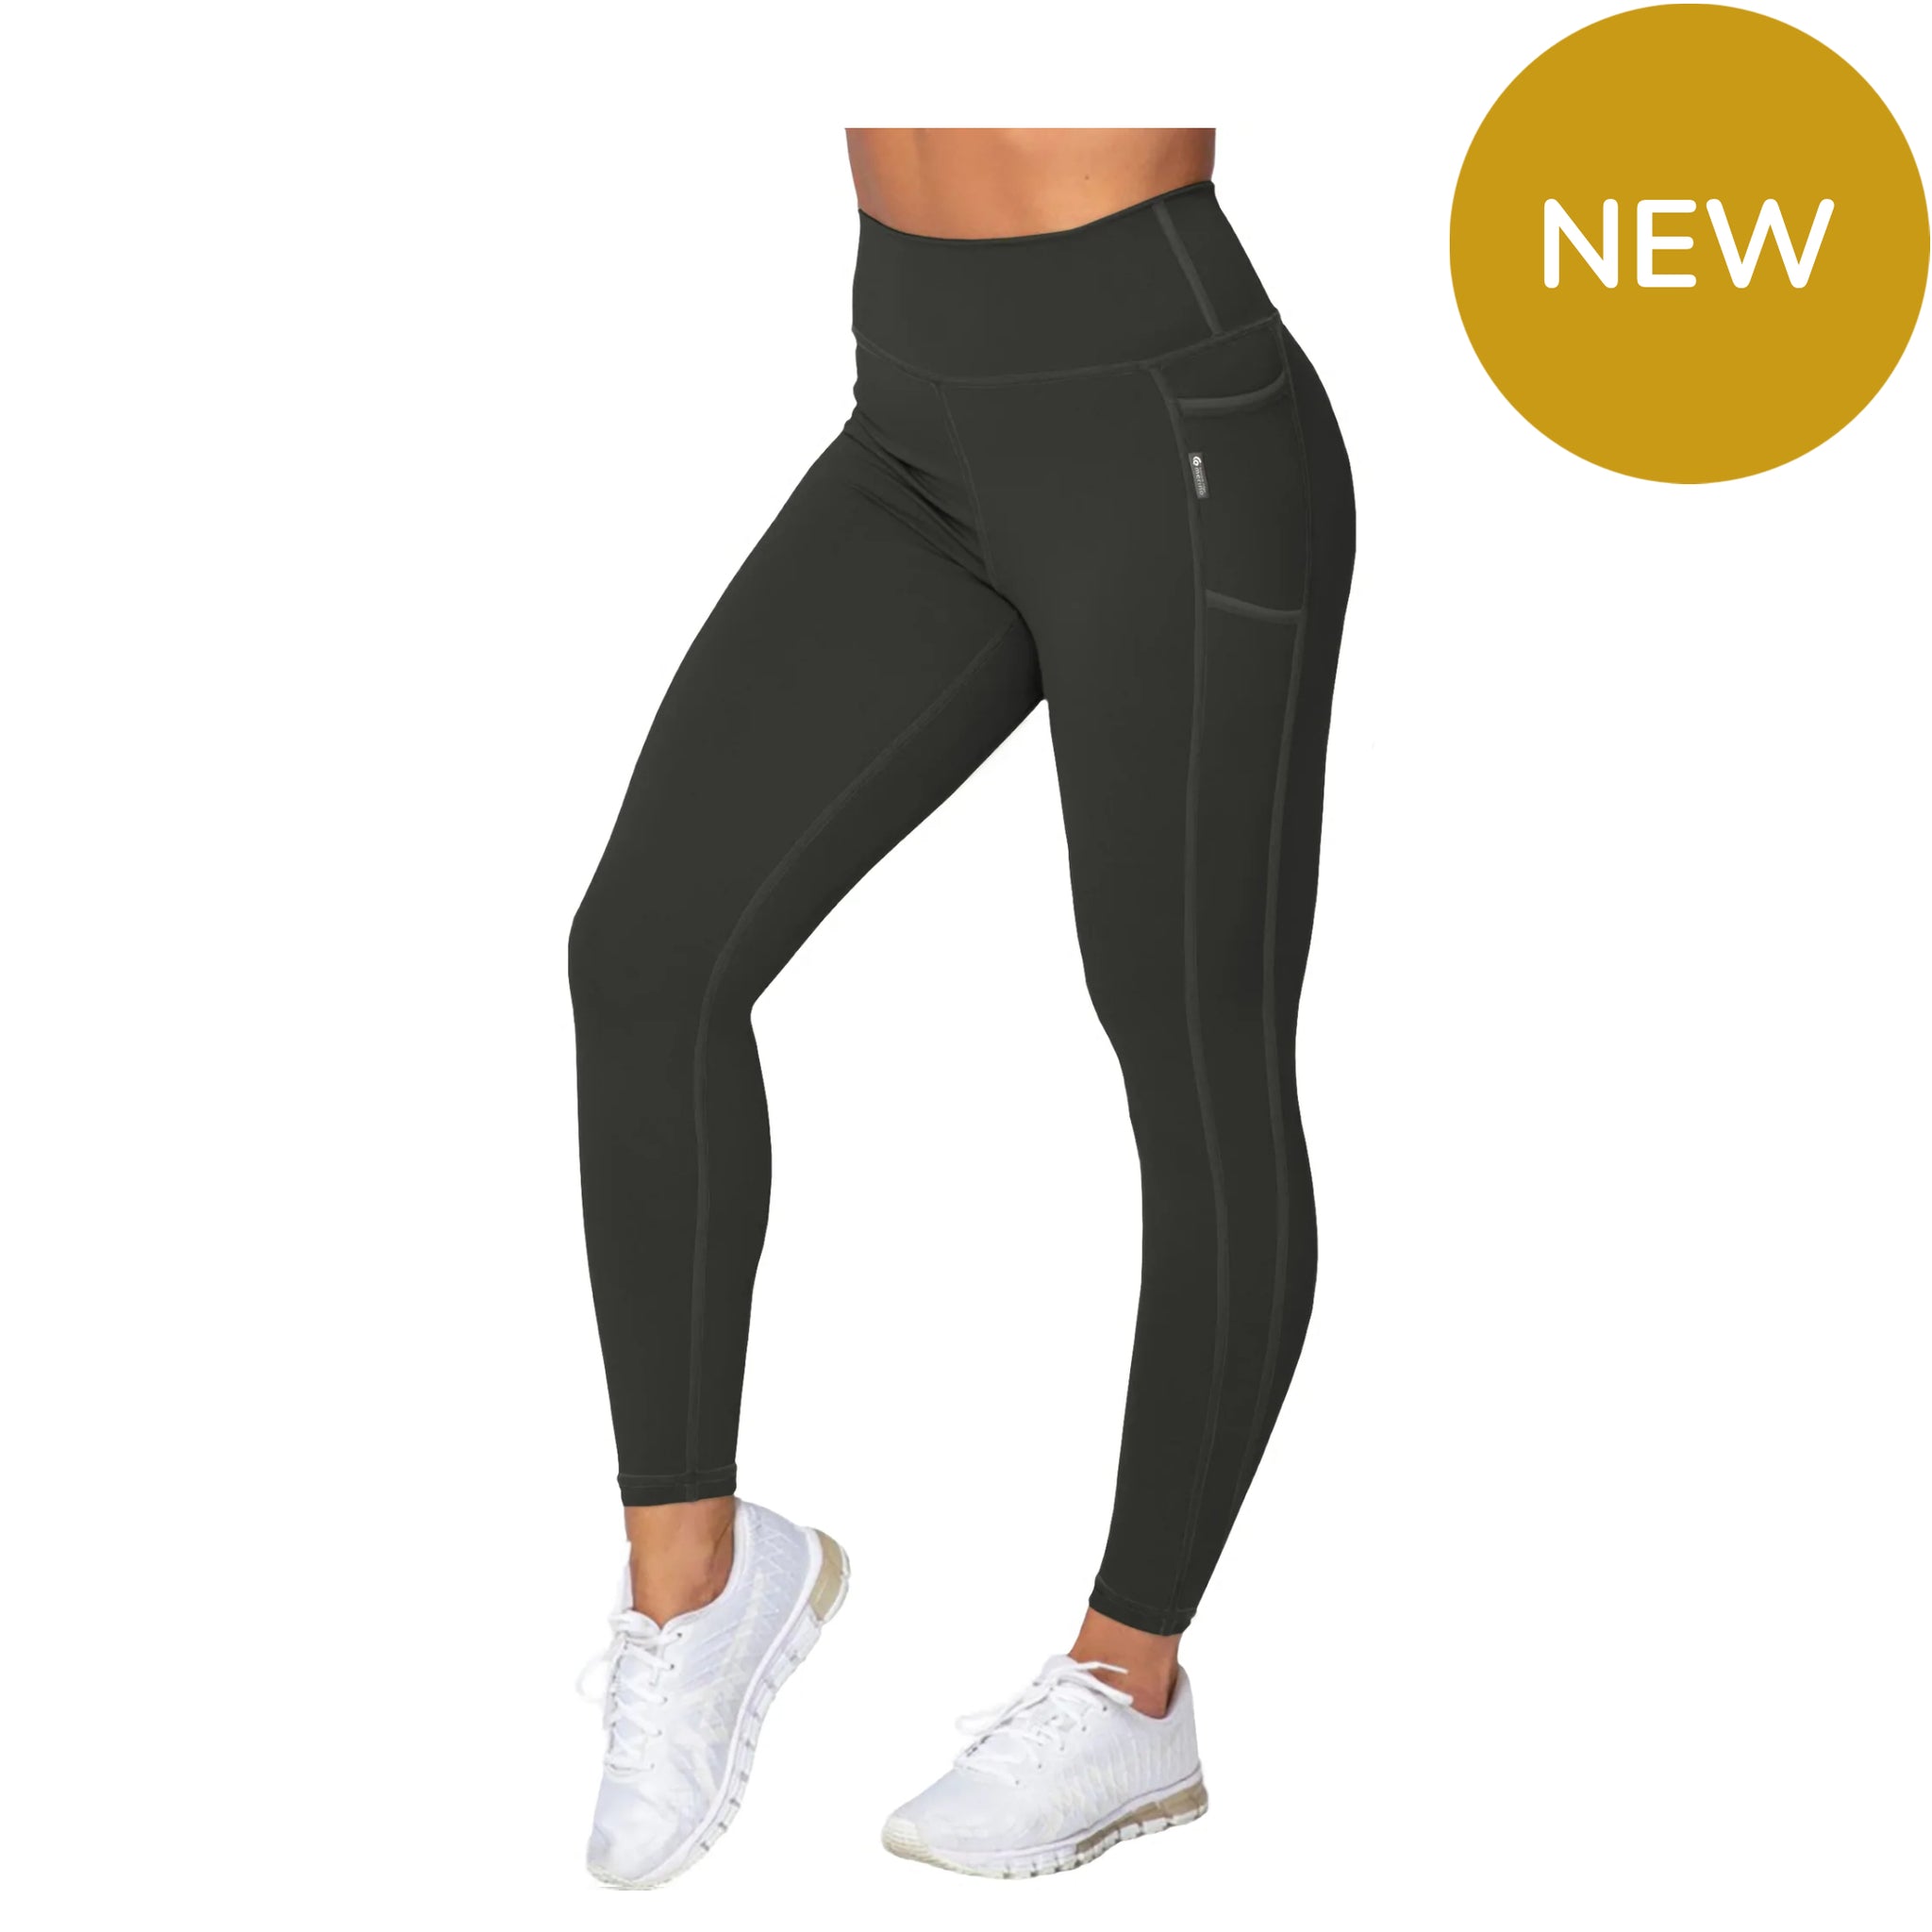 Ladies Charcoal Leggings. Made in New Zealand